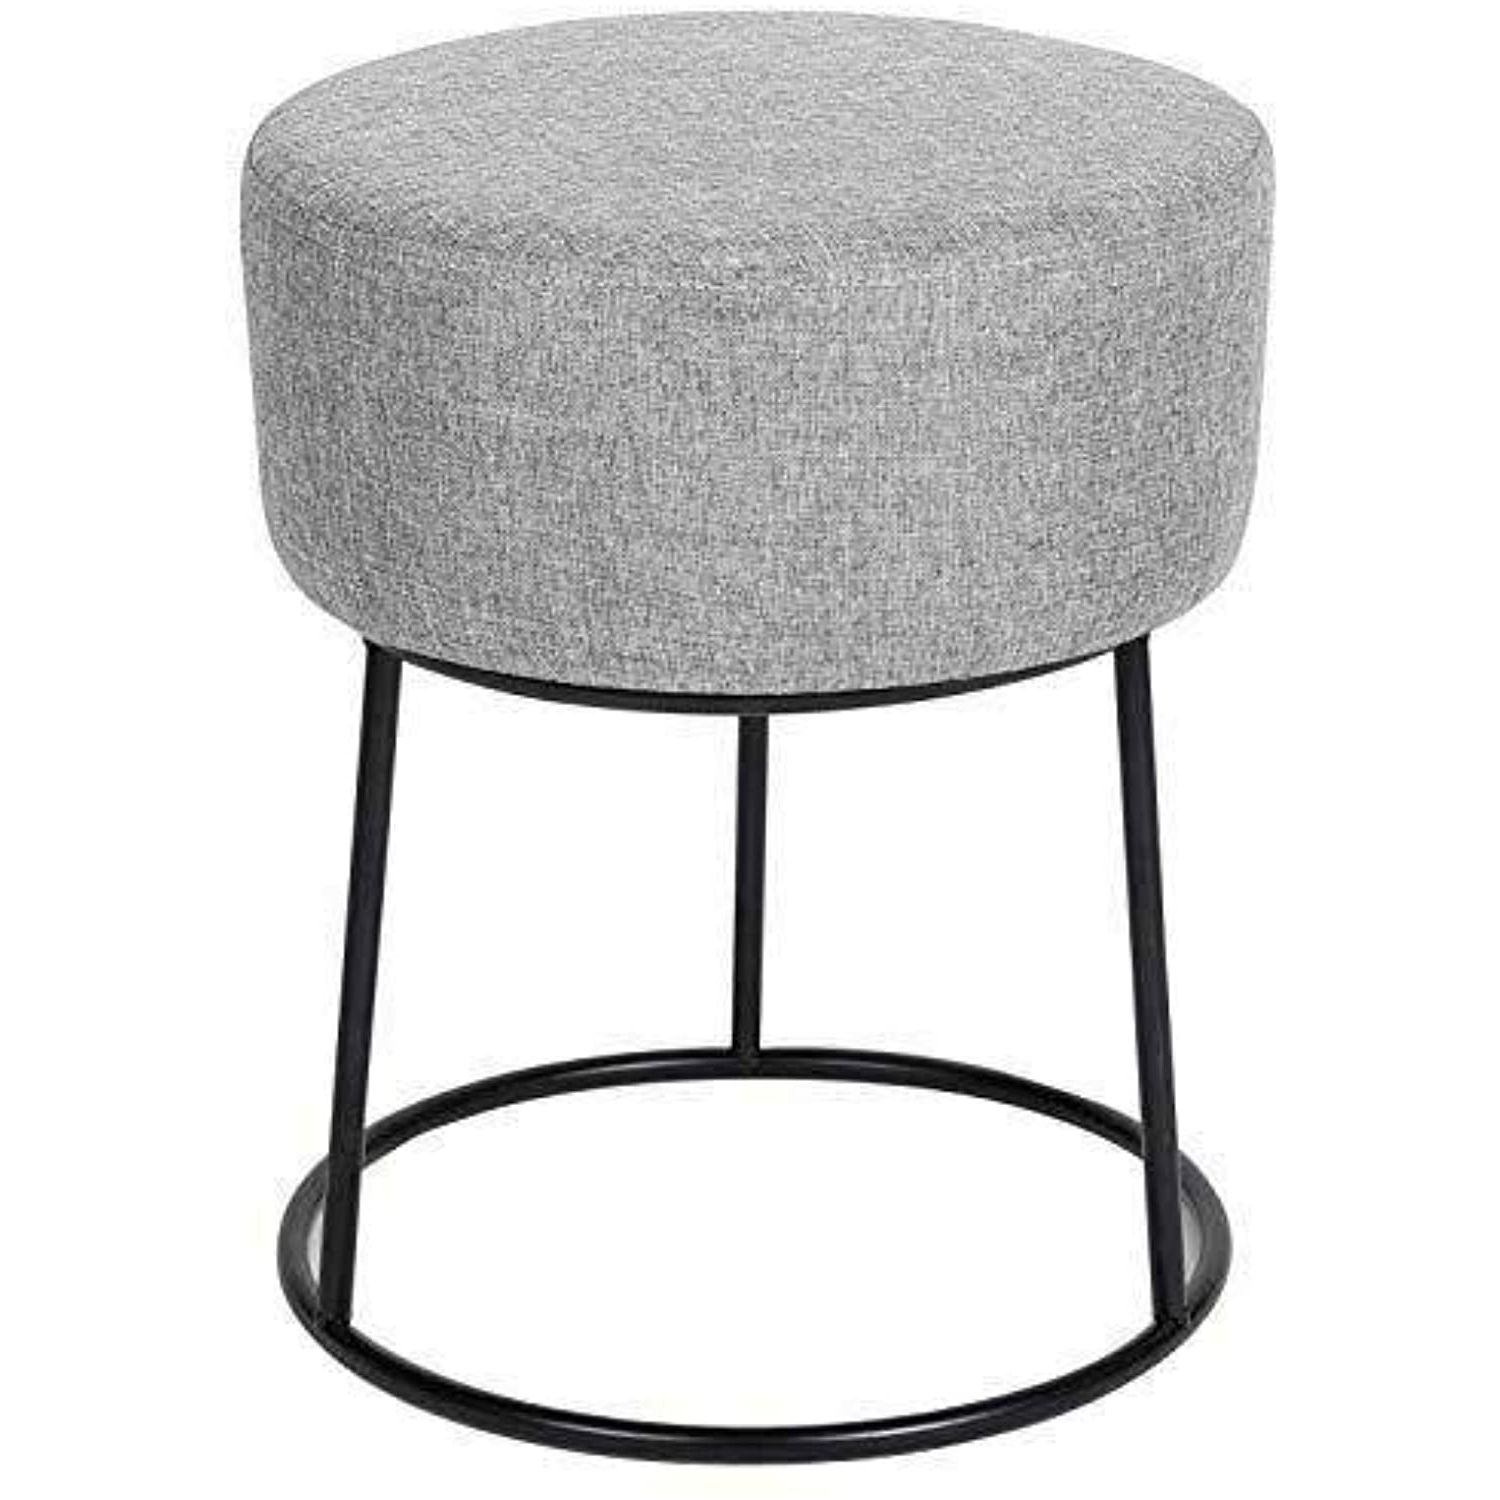 Famous Amazon: Grey Linen Foot Stool Ottoman – Soft Compact Round Padded Intended For Cream Linen And Fir Wood Round Ottomans (View 8 of 10)